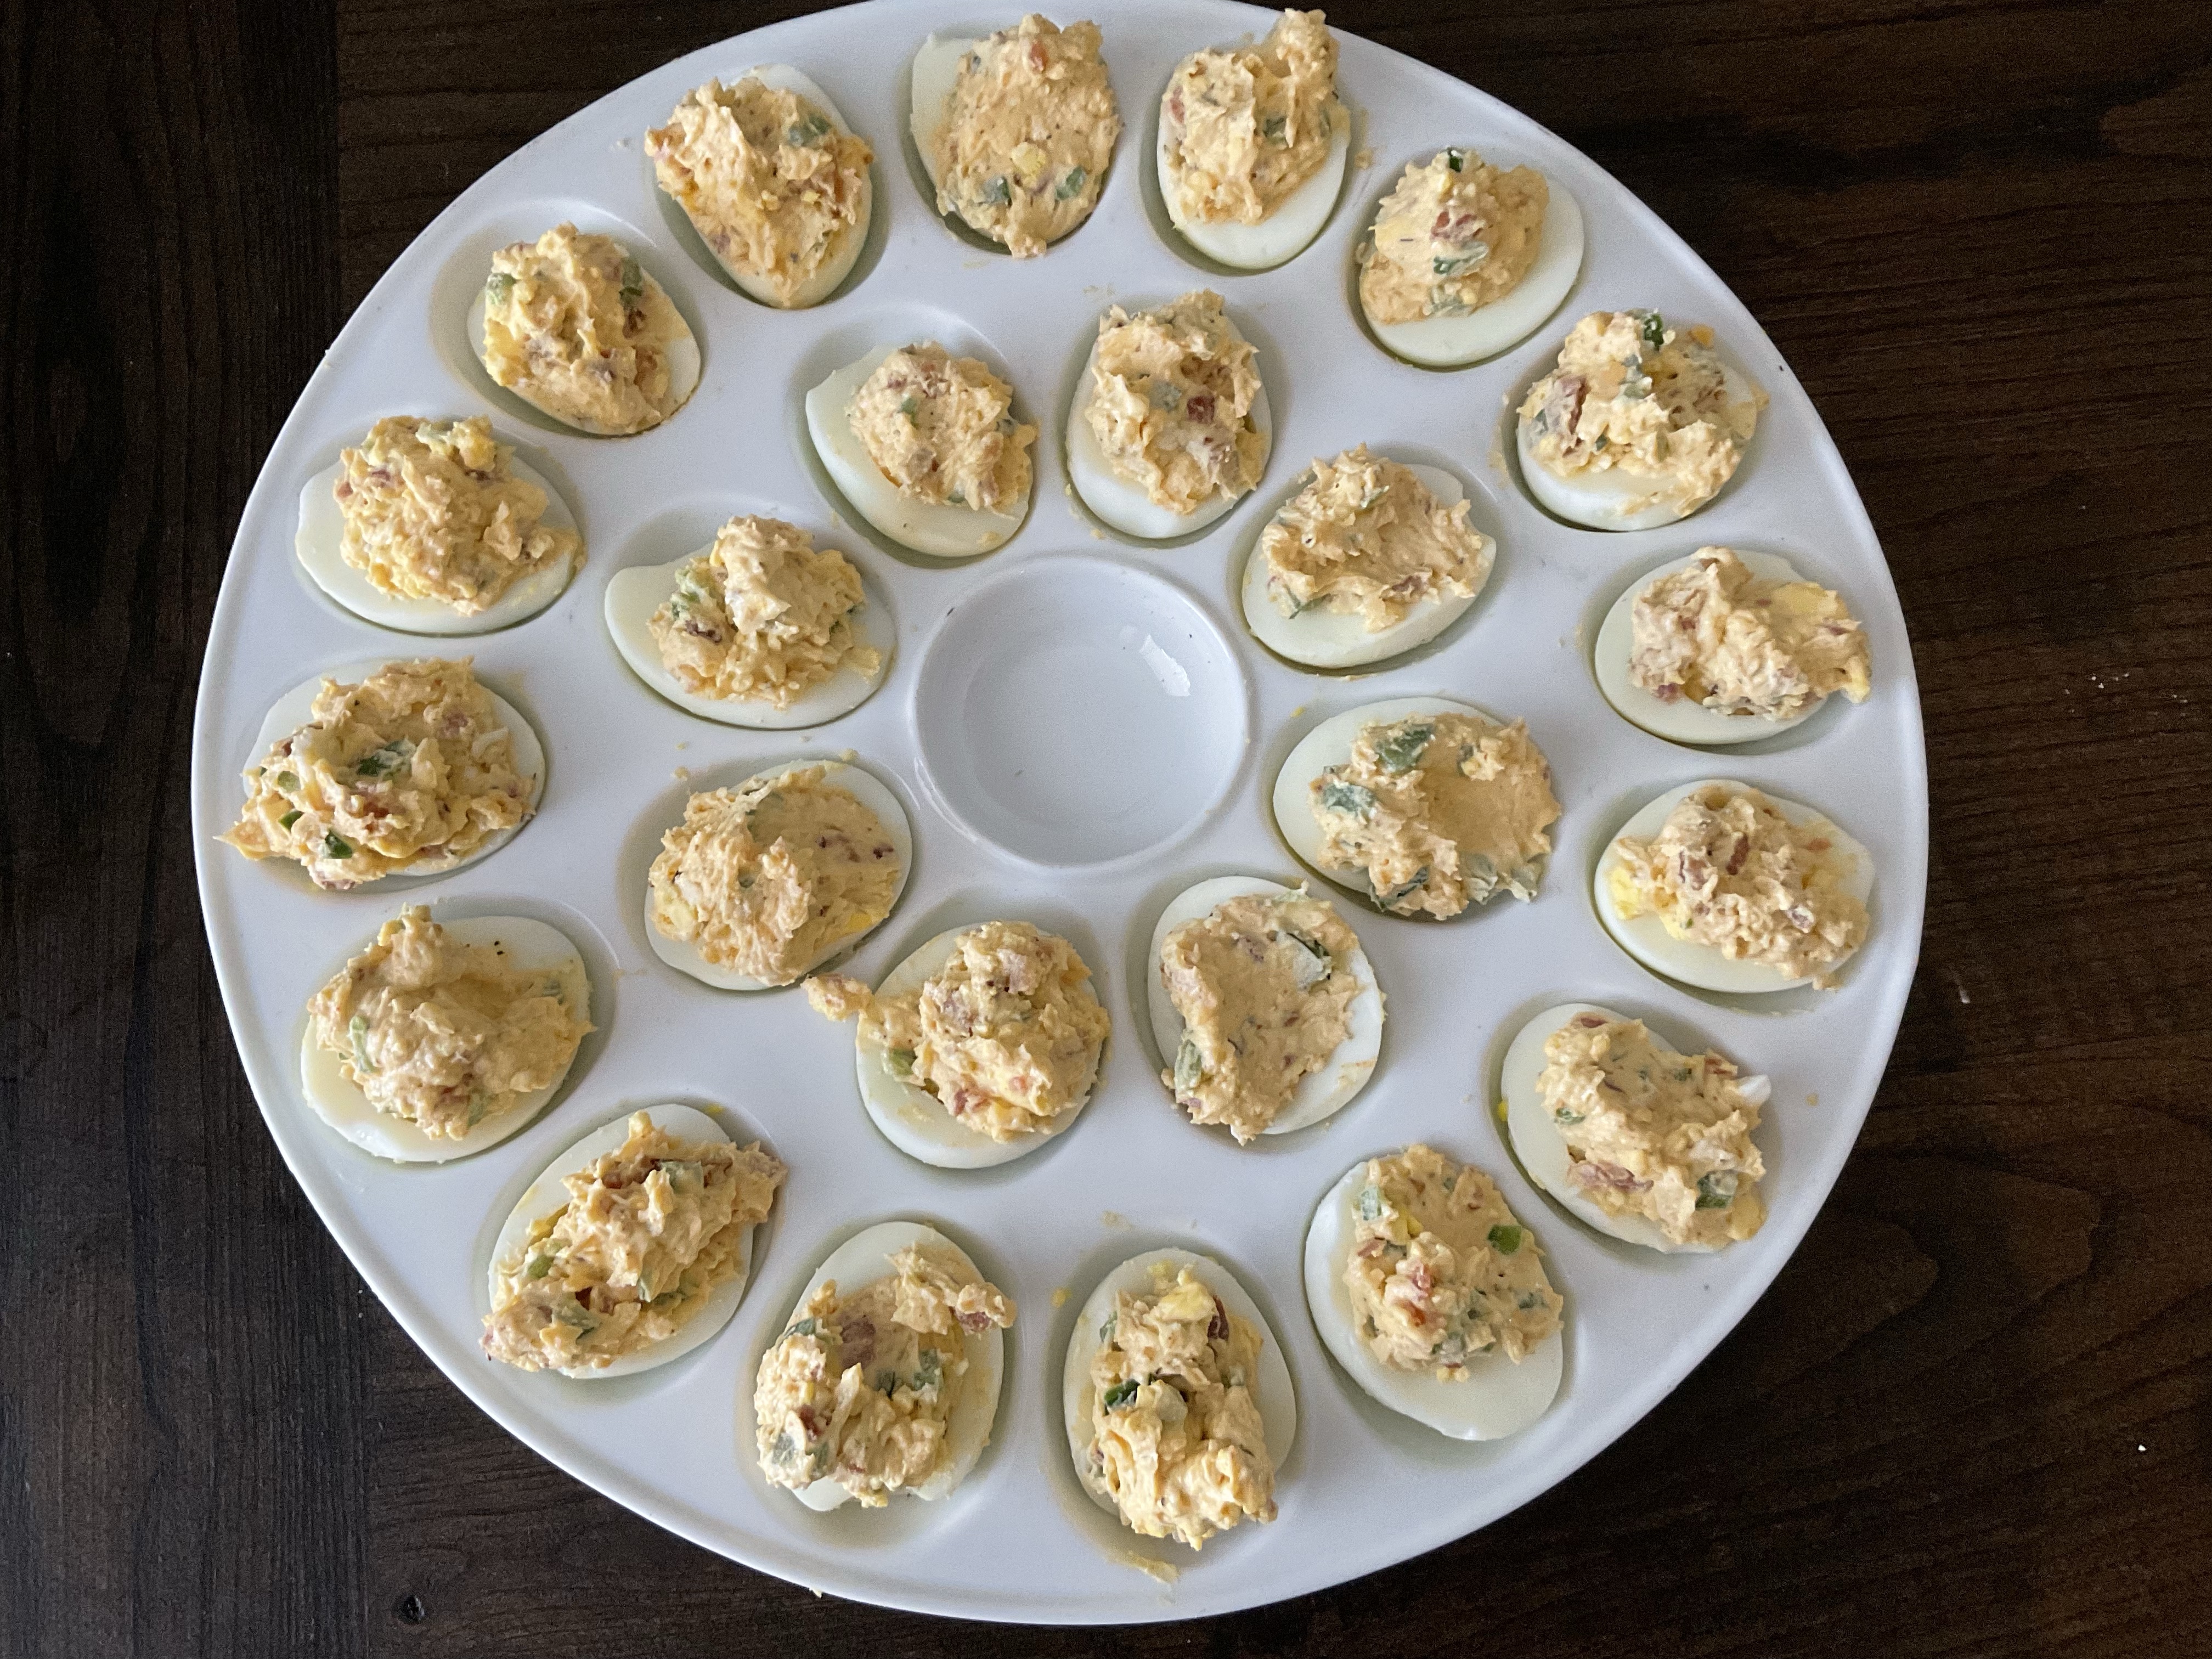 Deviled Eggs with a kick